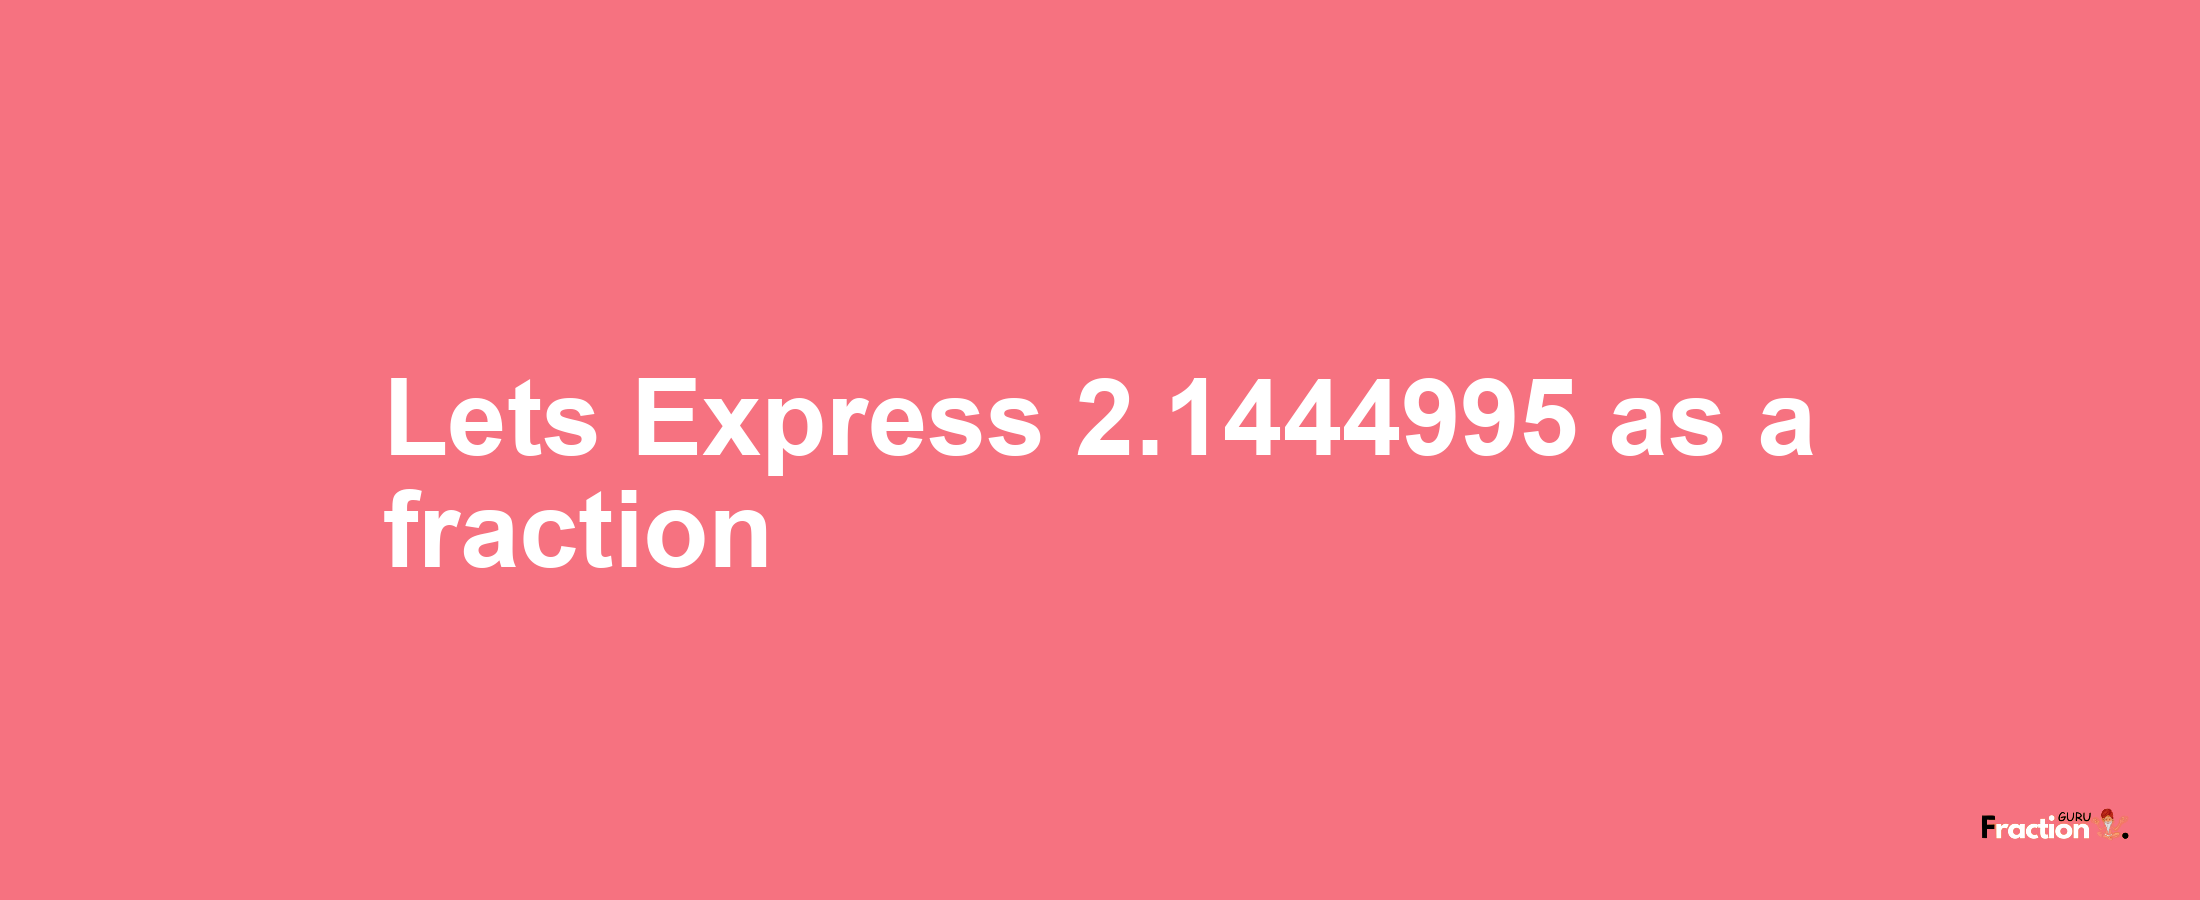 Lets Express 2.1444995 as afraction